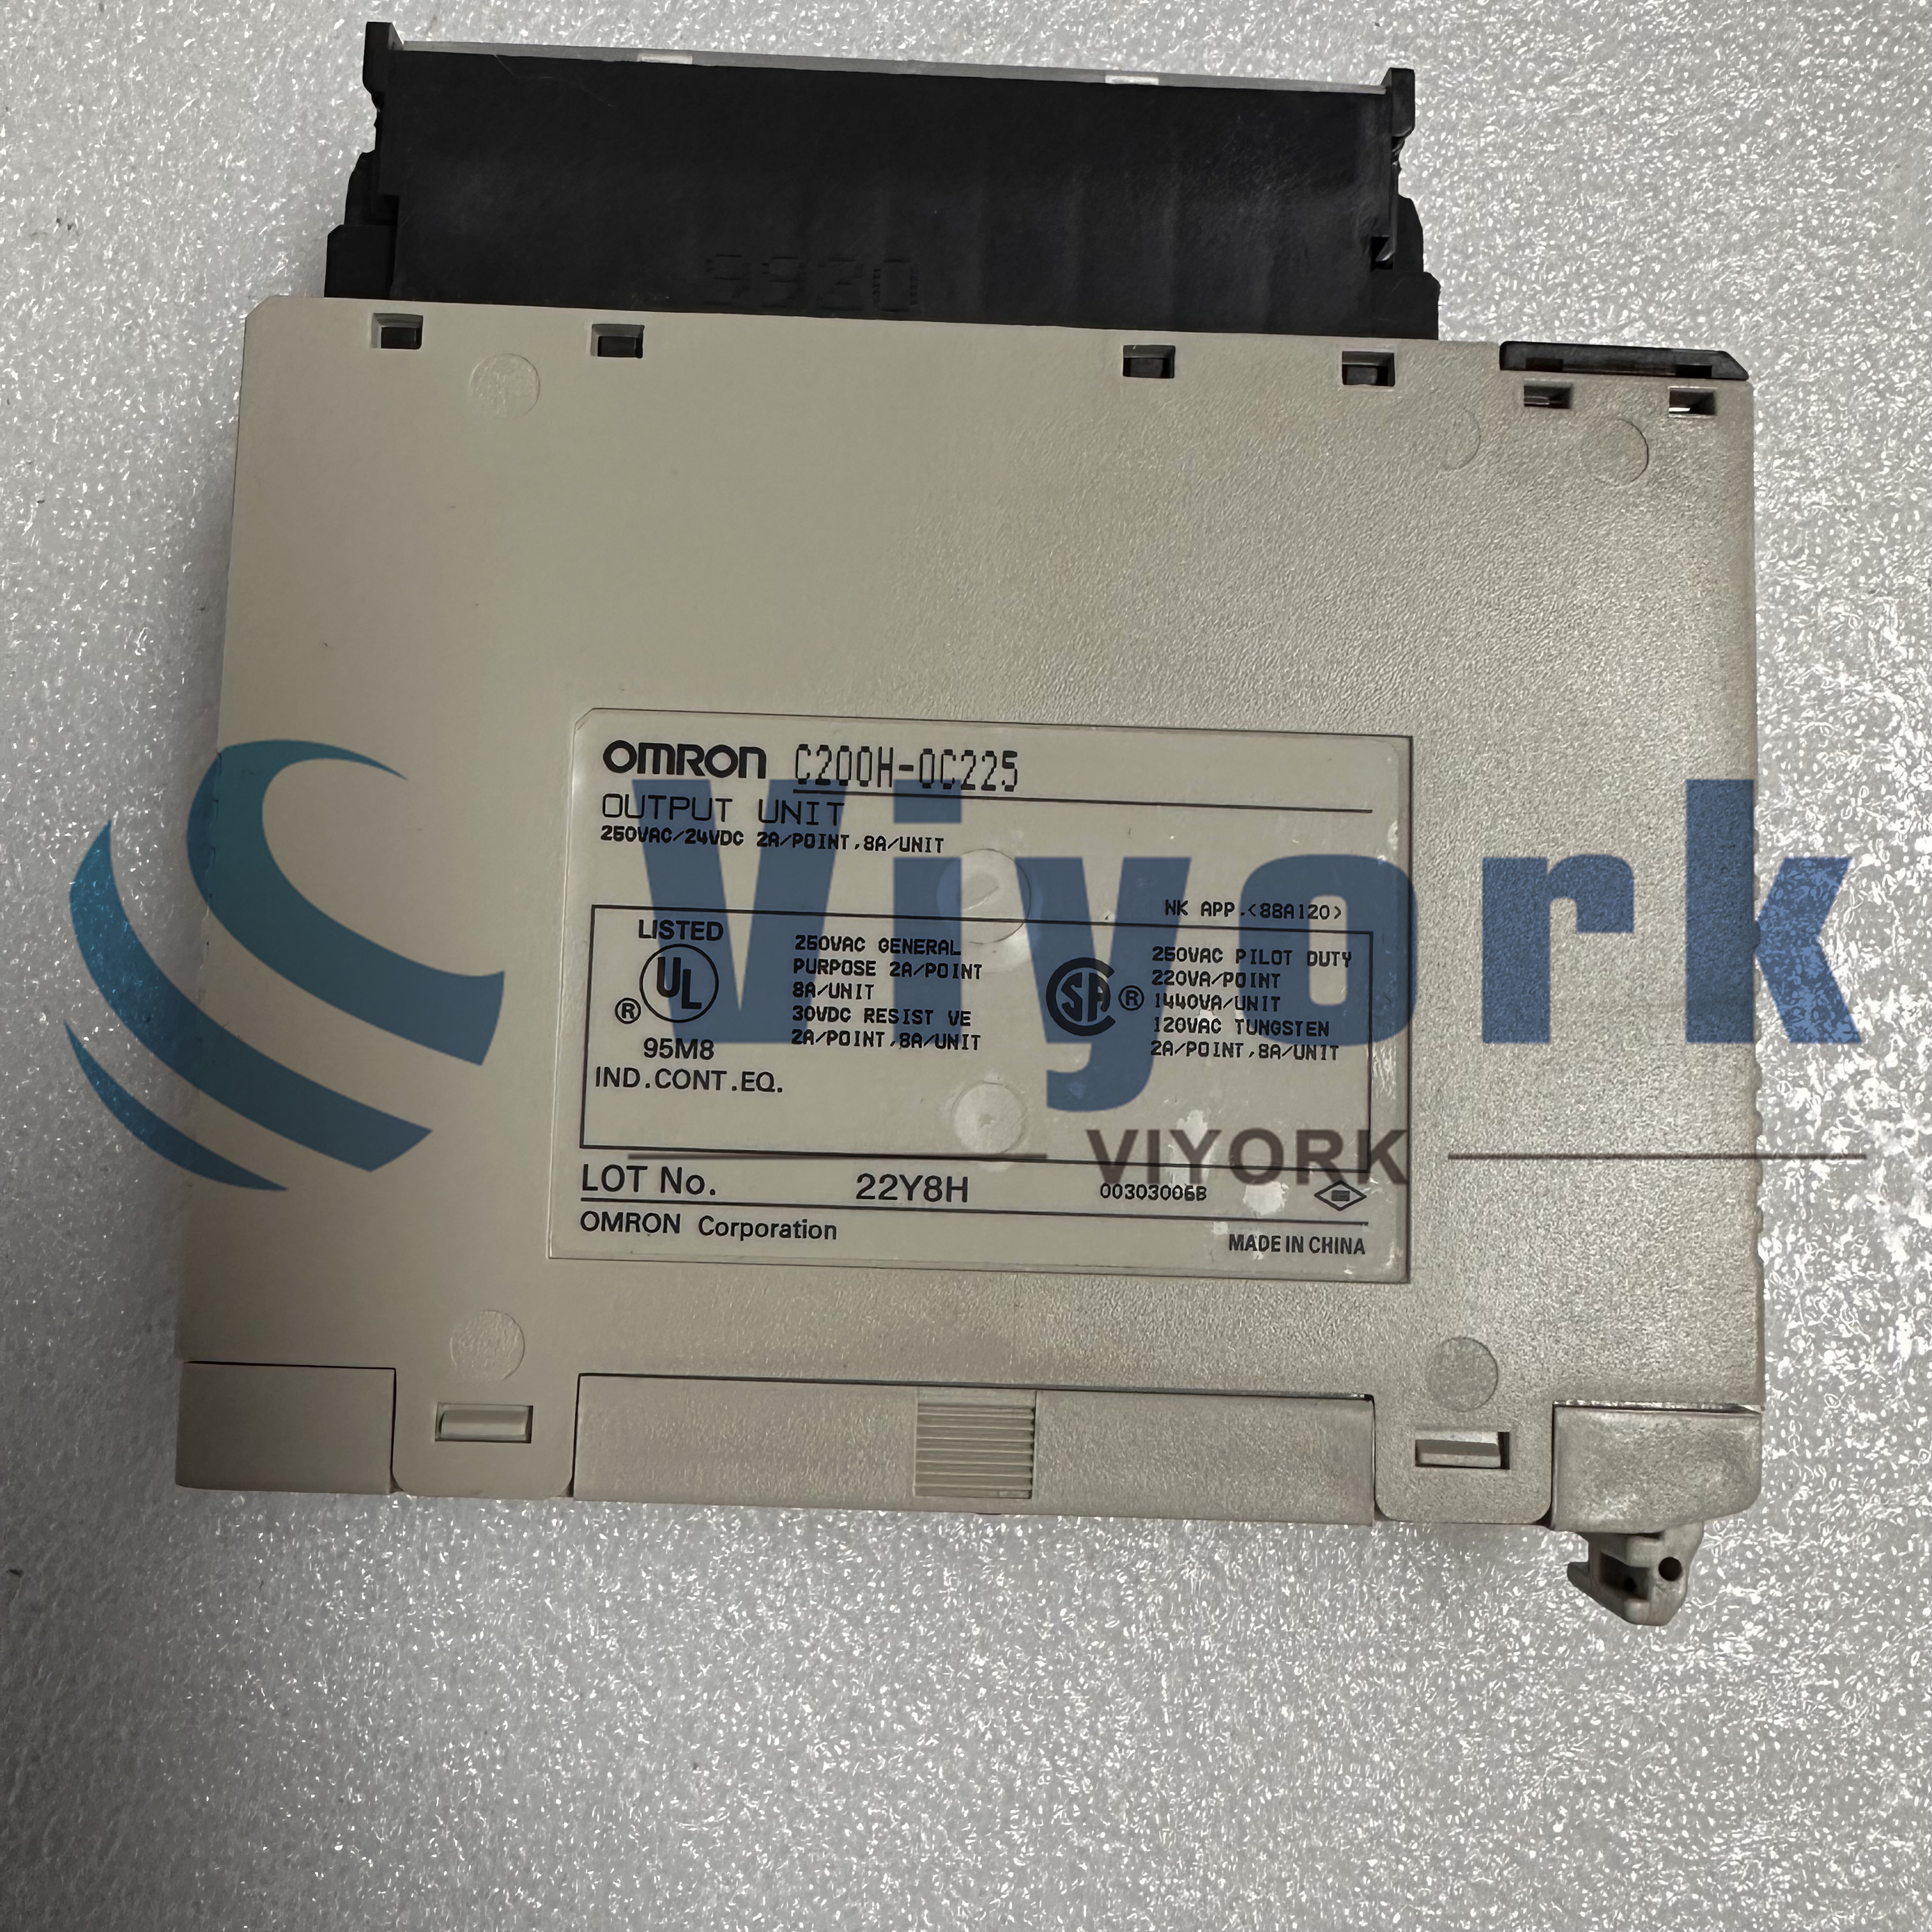 Omron C200H-OC225 OUTPUT MODULE CONTACT 2/8 AMP 250 VAC/24 VDC NEW